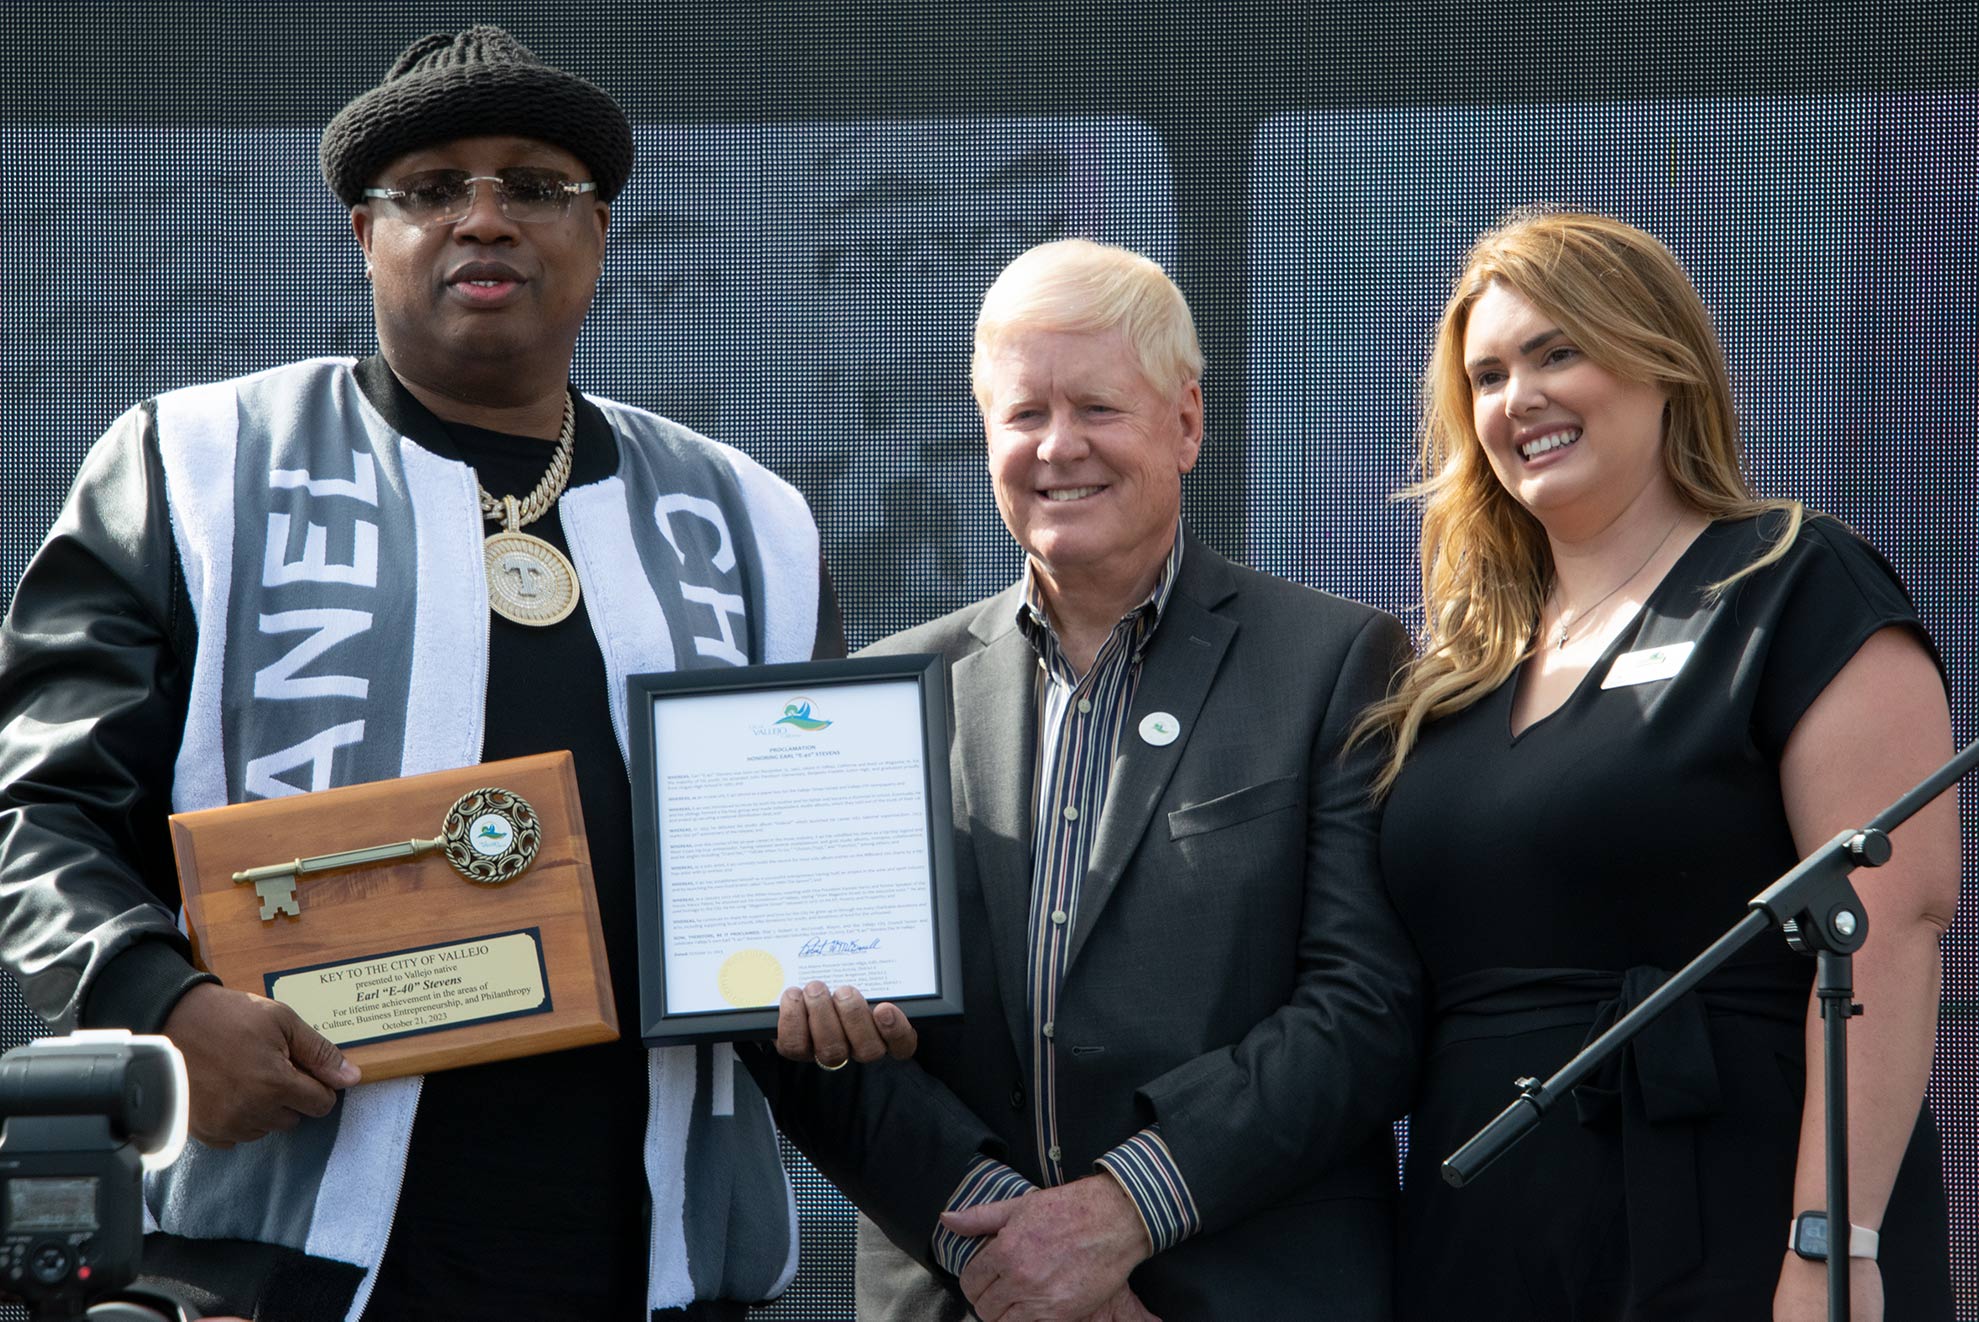 E-40 received the key to the city of Vallejo on Saturday from Mayor Robert McConnell and assistant to the city manager Natalie Peterson.